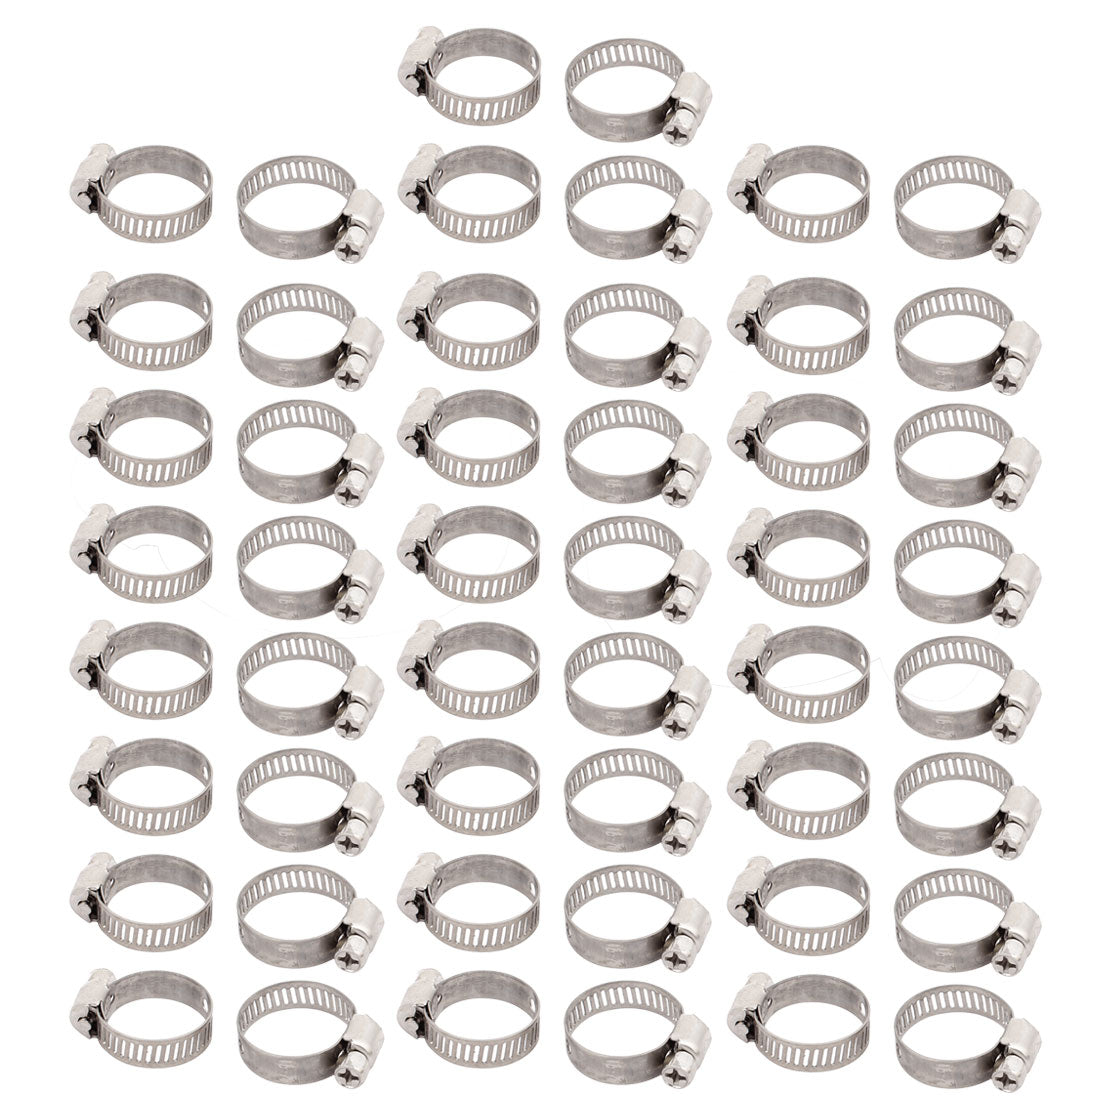 uxcell Uxcell 16mm-25mm Adjustable Range 8mm Width Stainless Steel  Gear Hose Clamp 50pcs